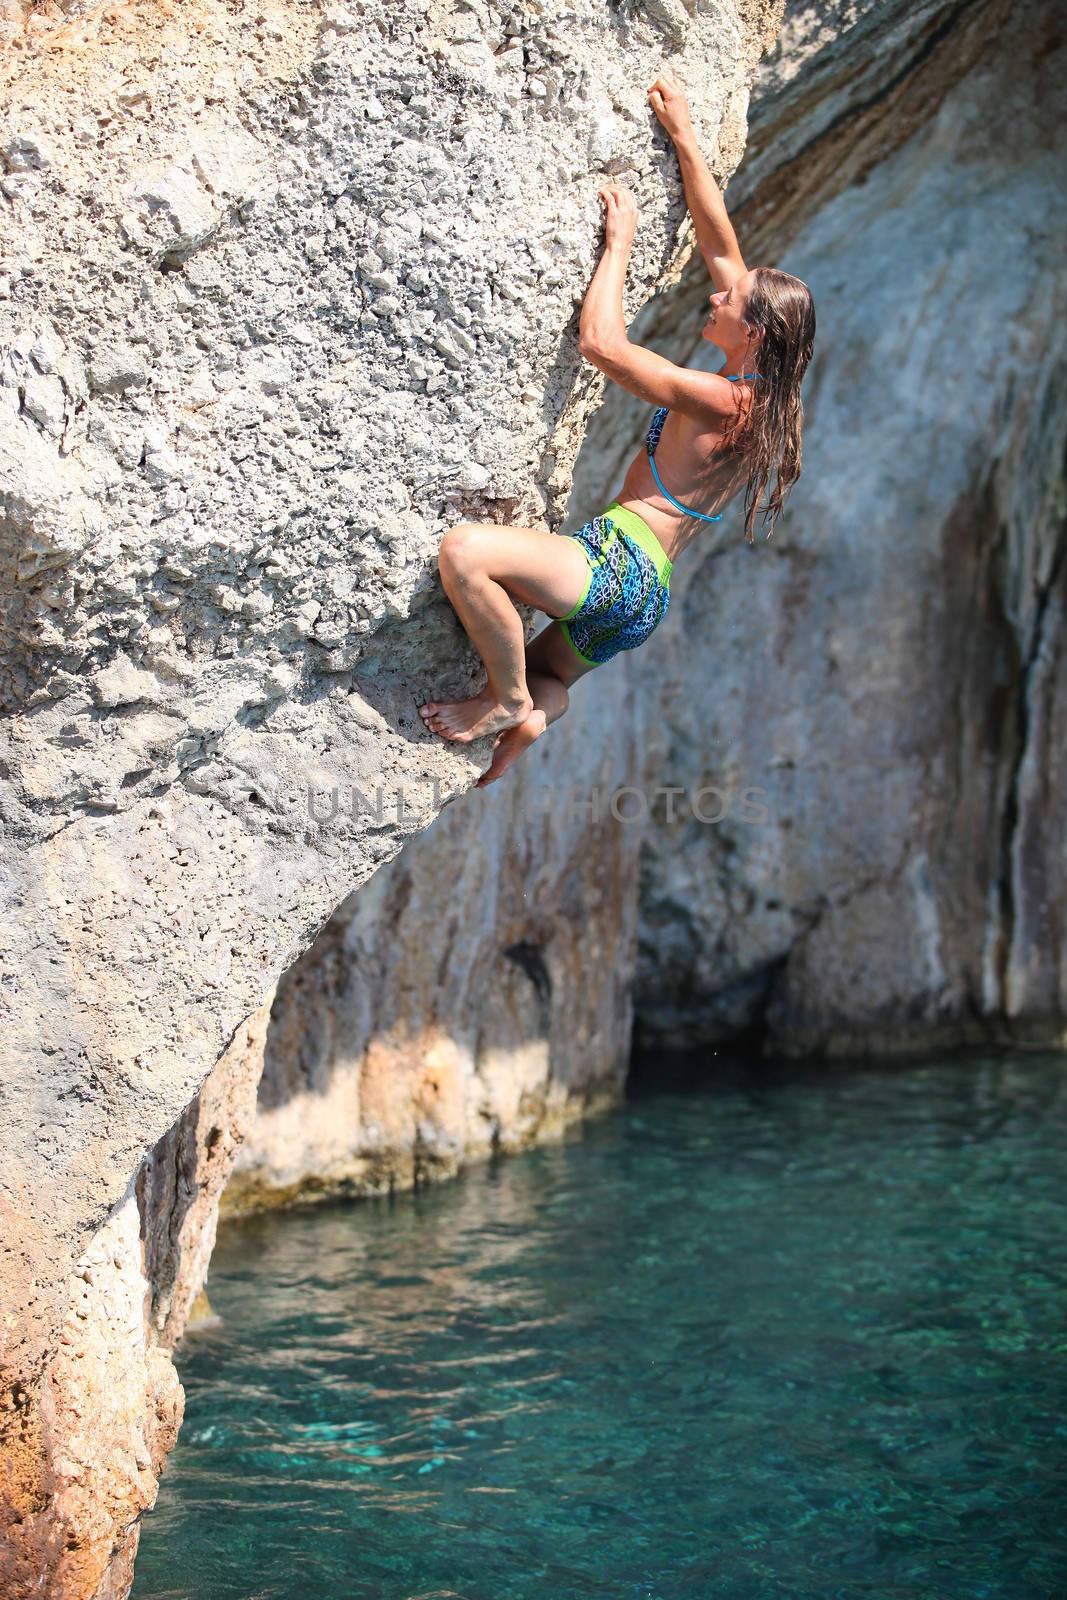 Deep water soloing, young female rock climber on cliff